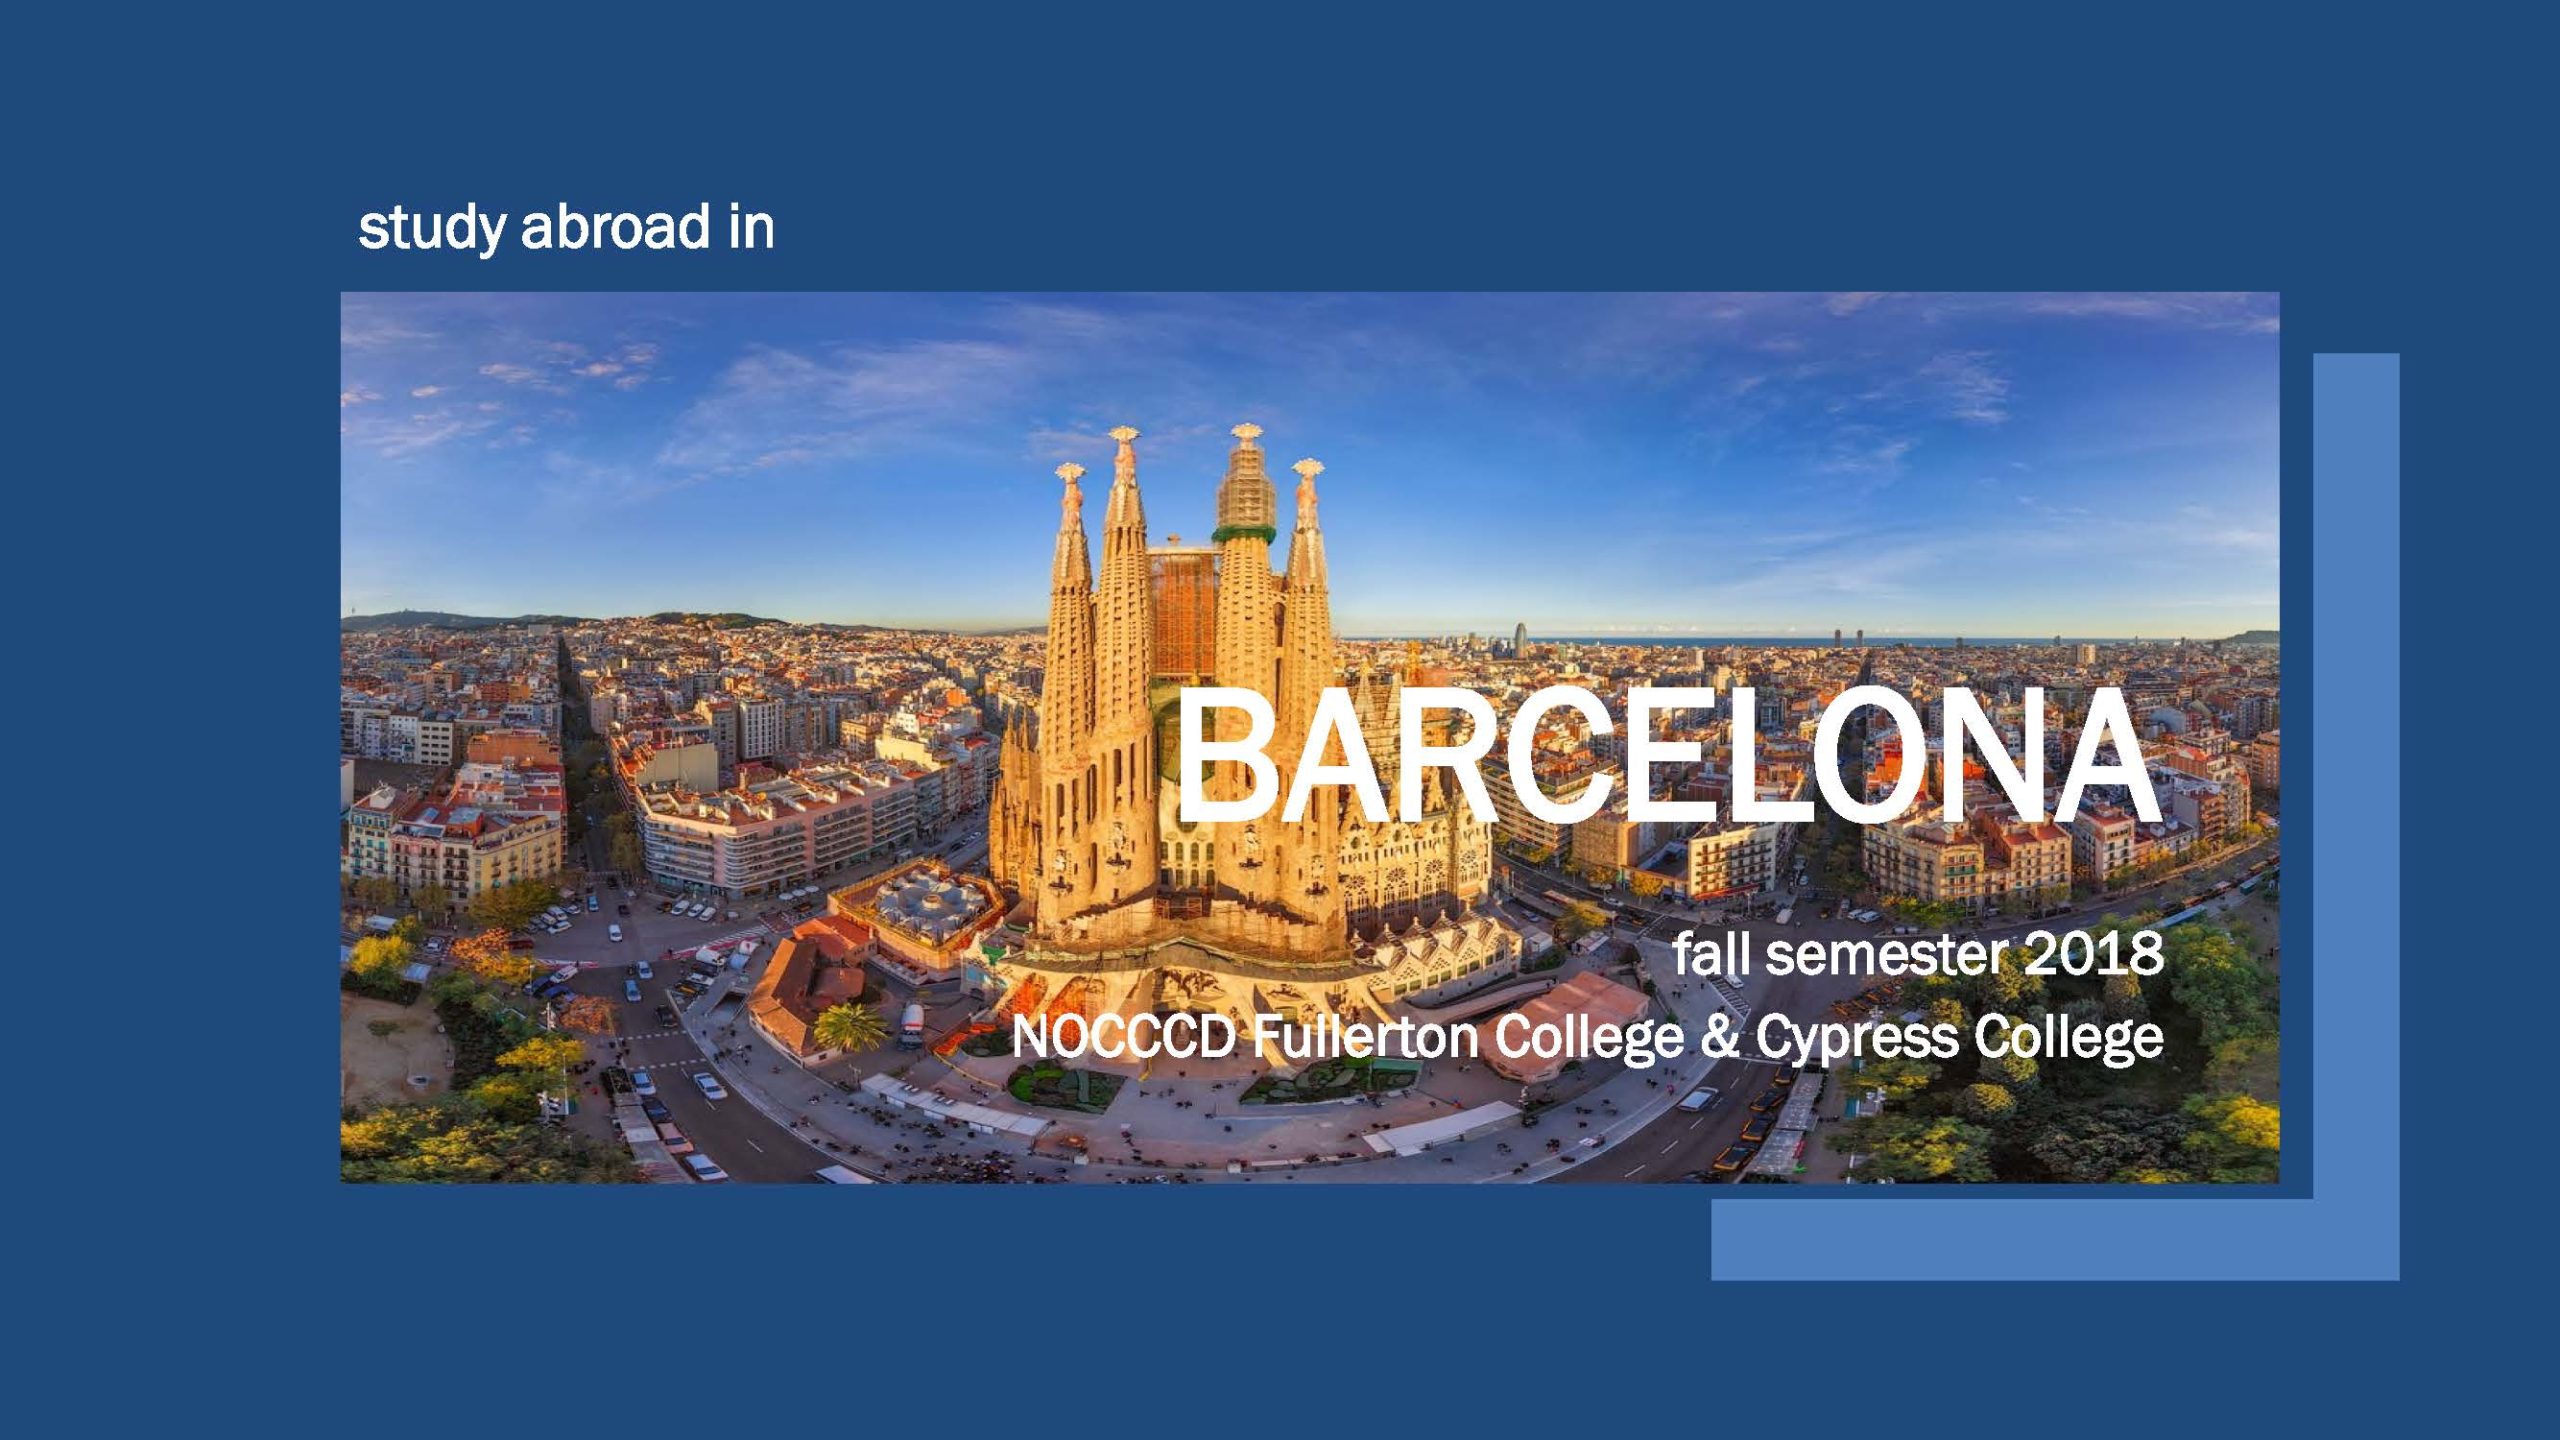 Study abroad in Barcelona flyer